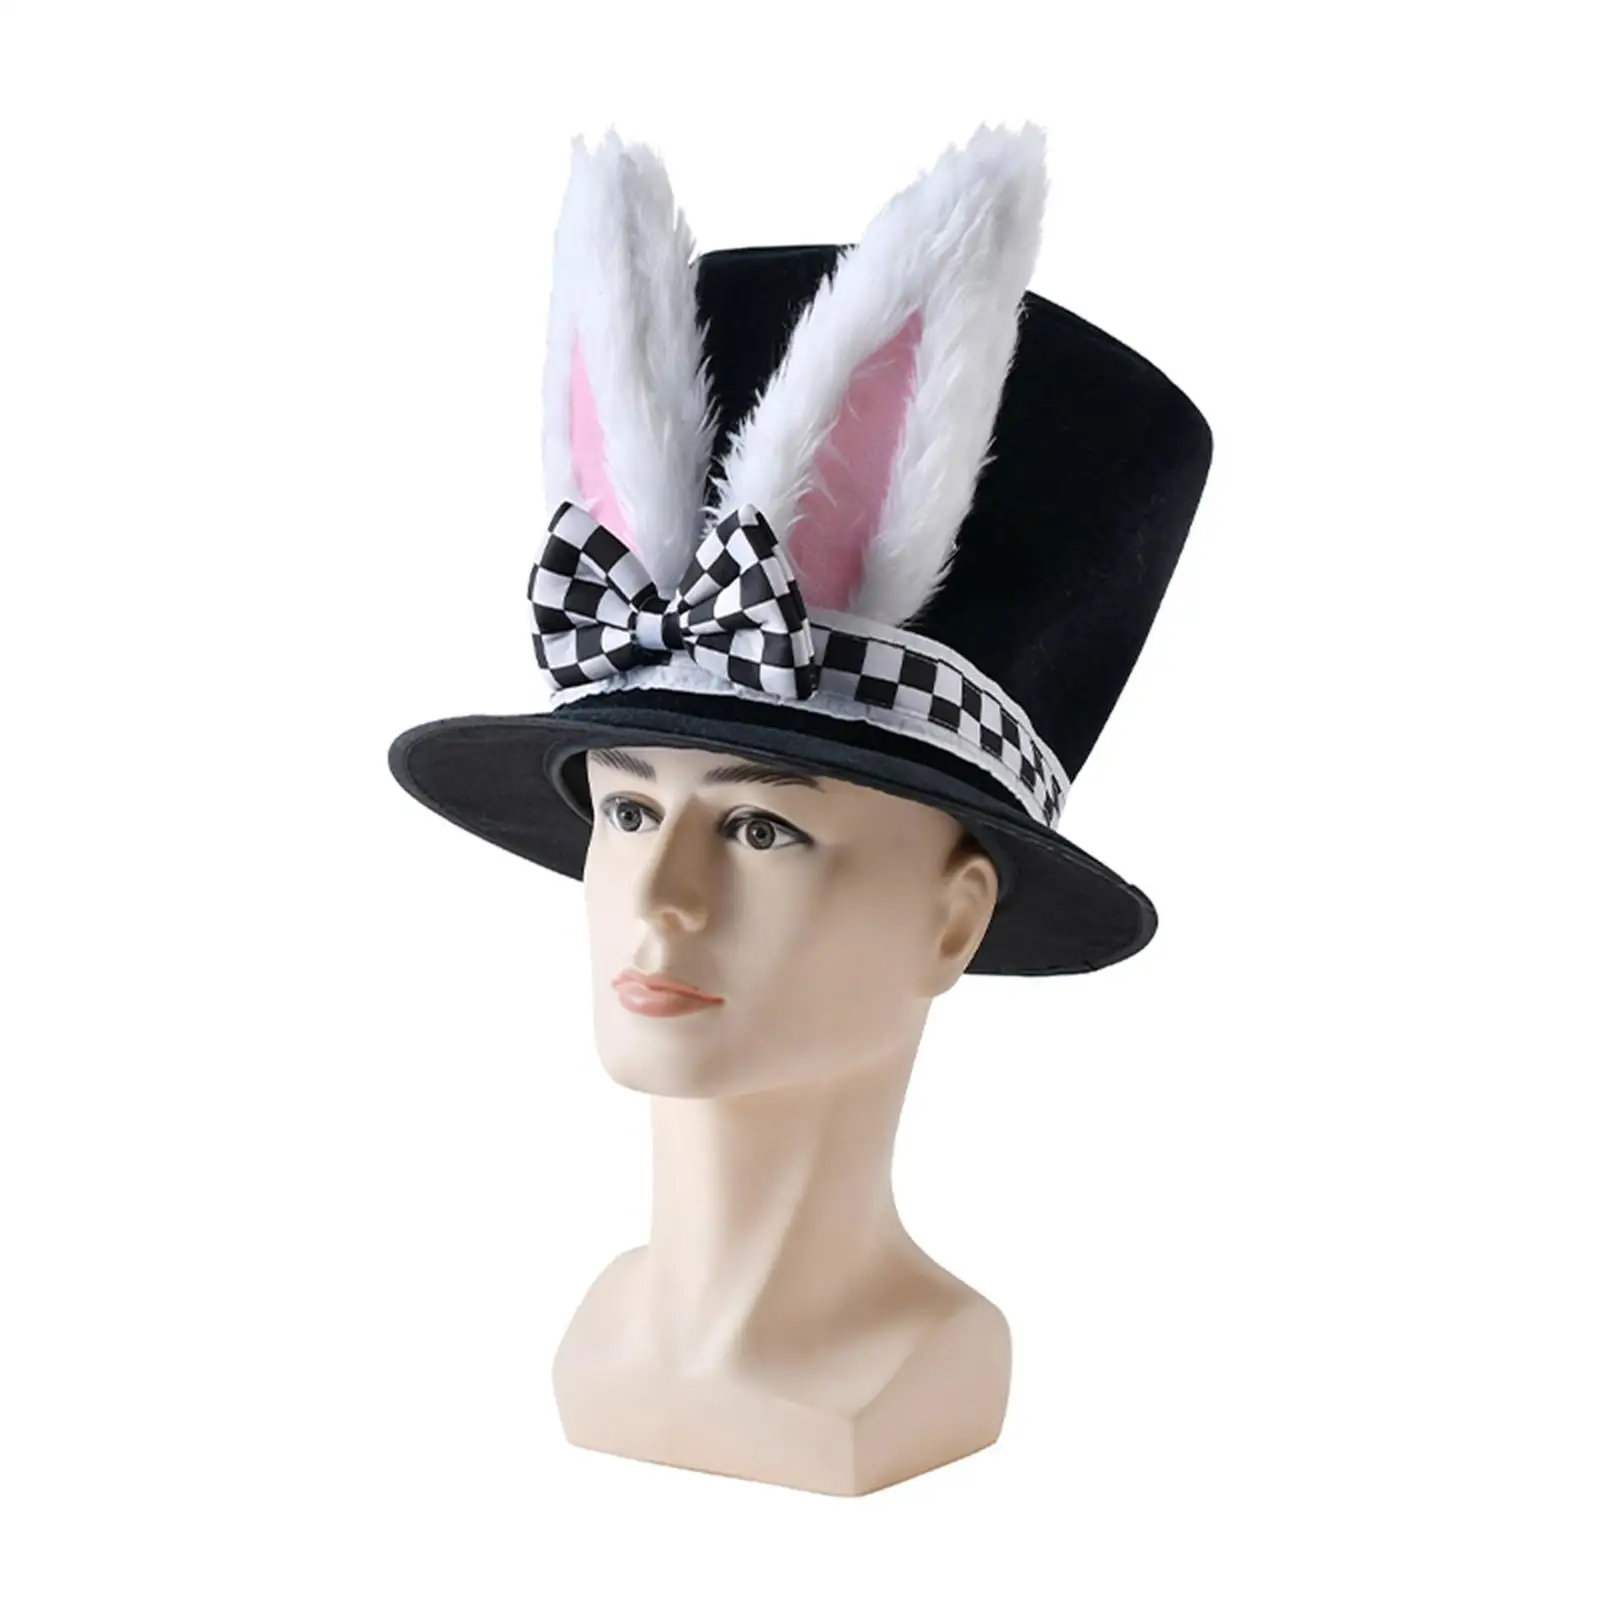 Man Velvet Bunny Ear Top Hat Hand Wash Decorations Comfortable to Wear